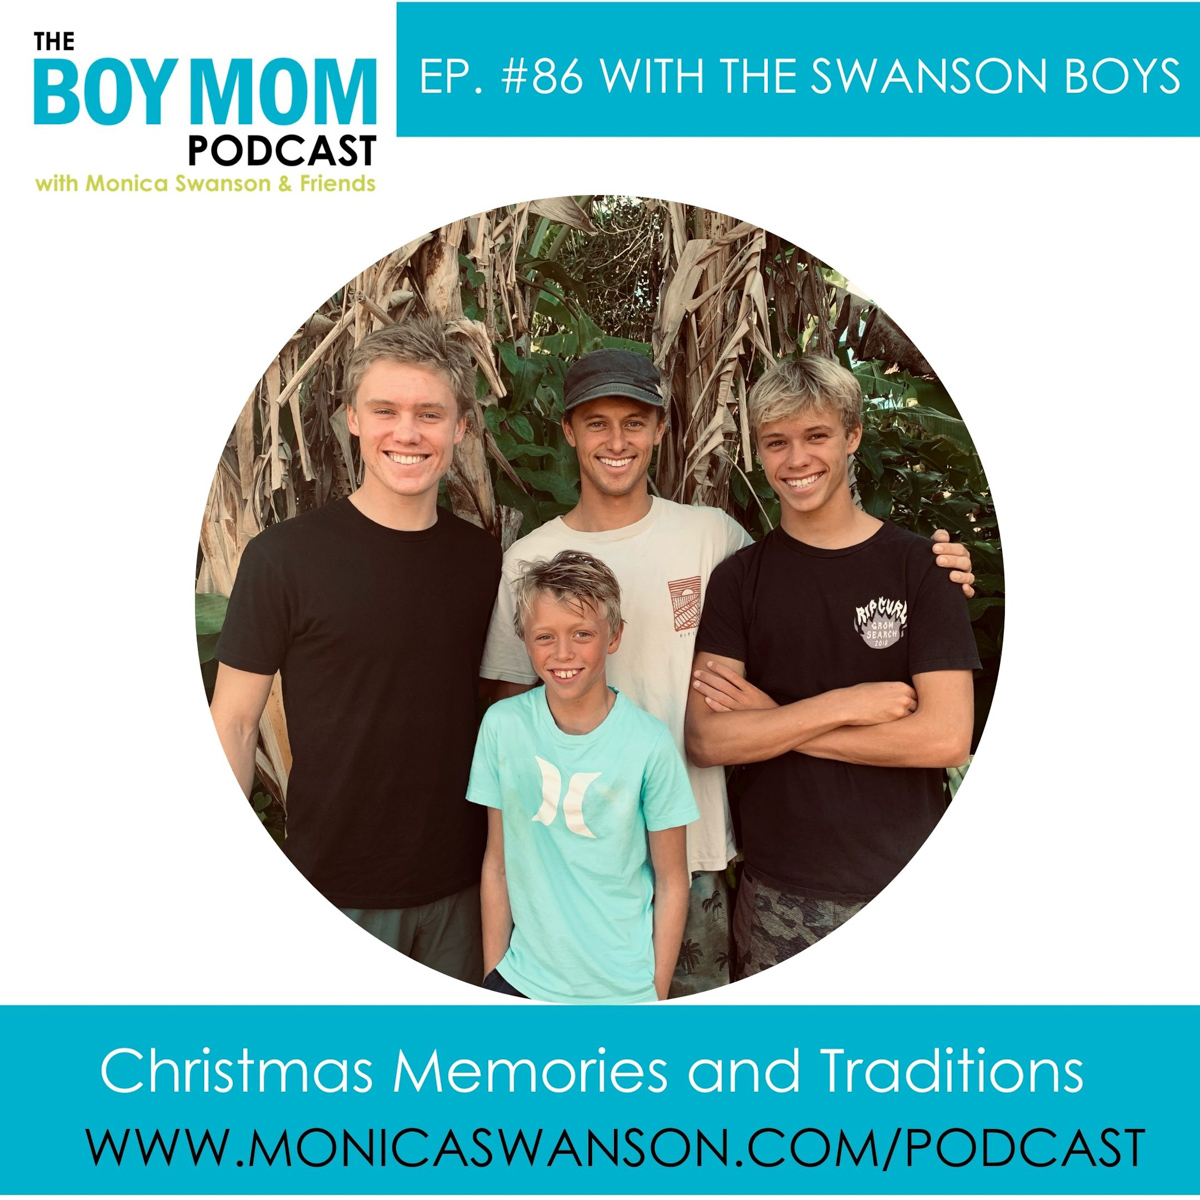 Favorite Christmas Memories and Traditions {Episode 86, with the Swanson Boys}